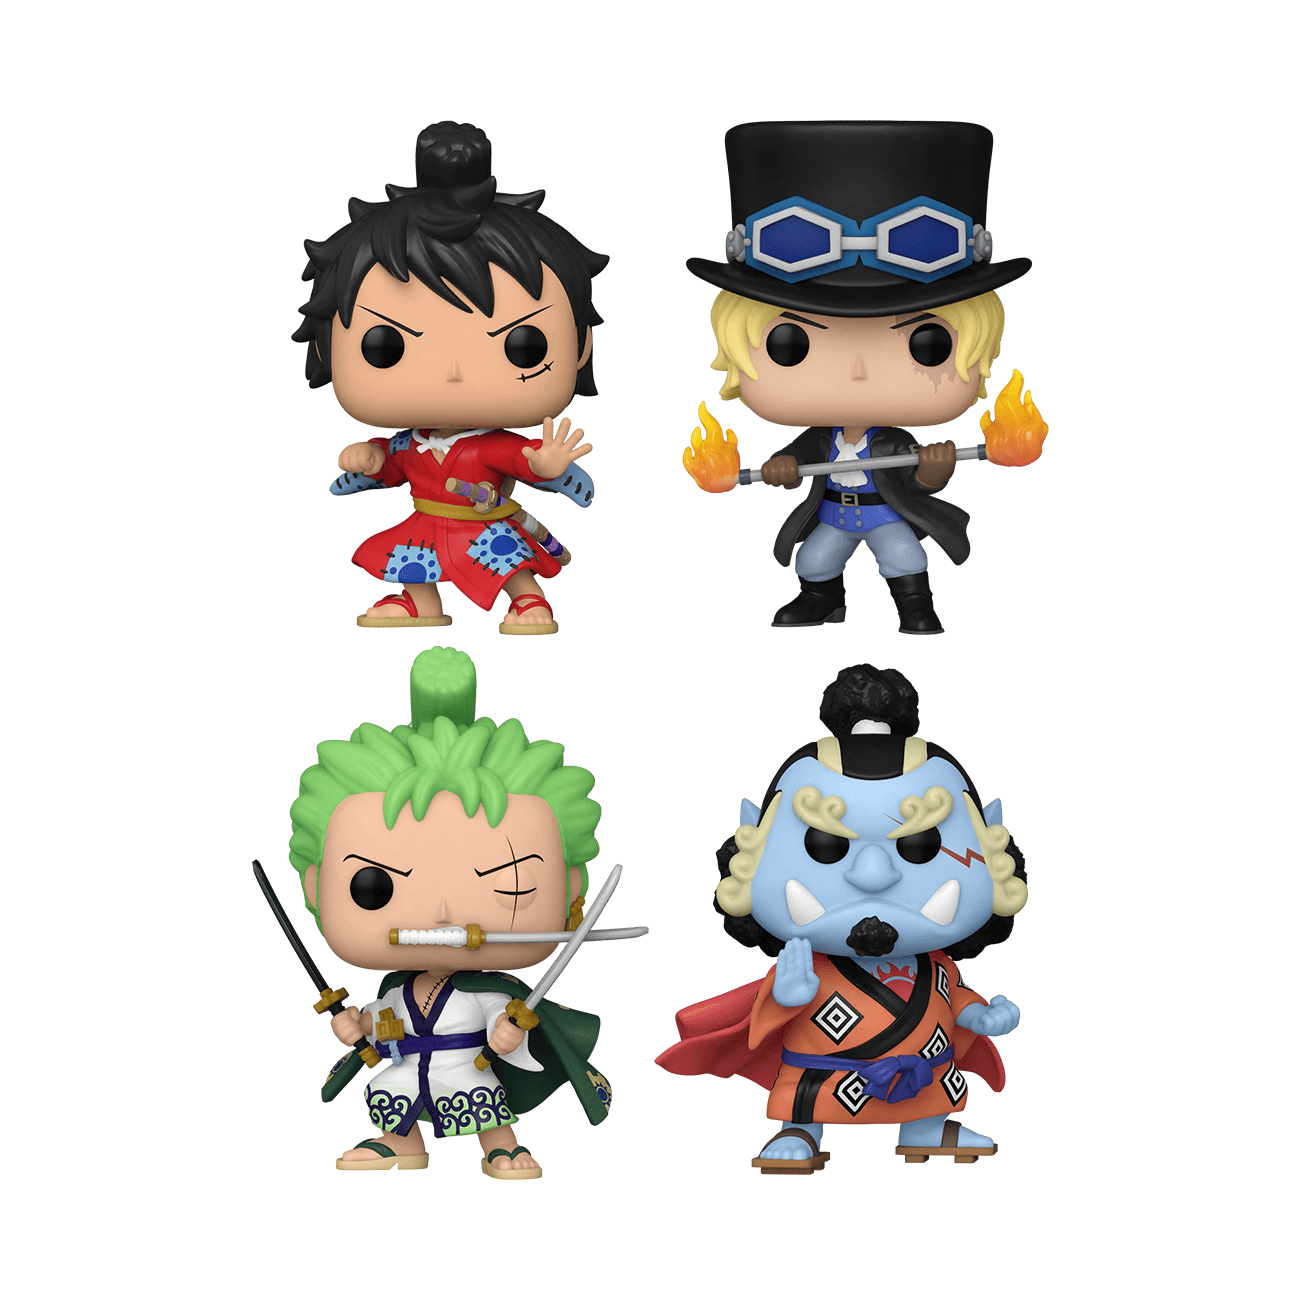 Buy Pop! One Piece 4Pack at Funko.